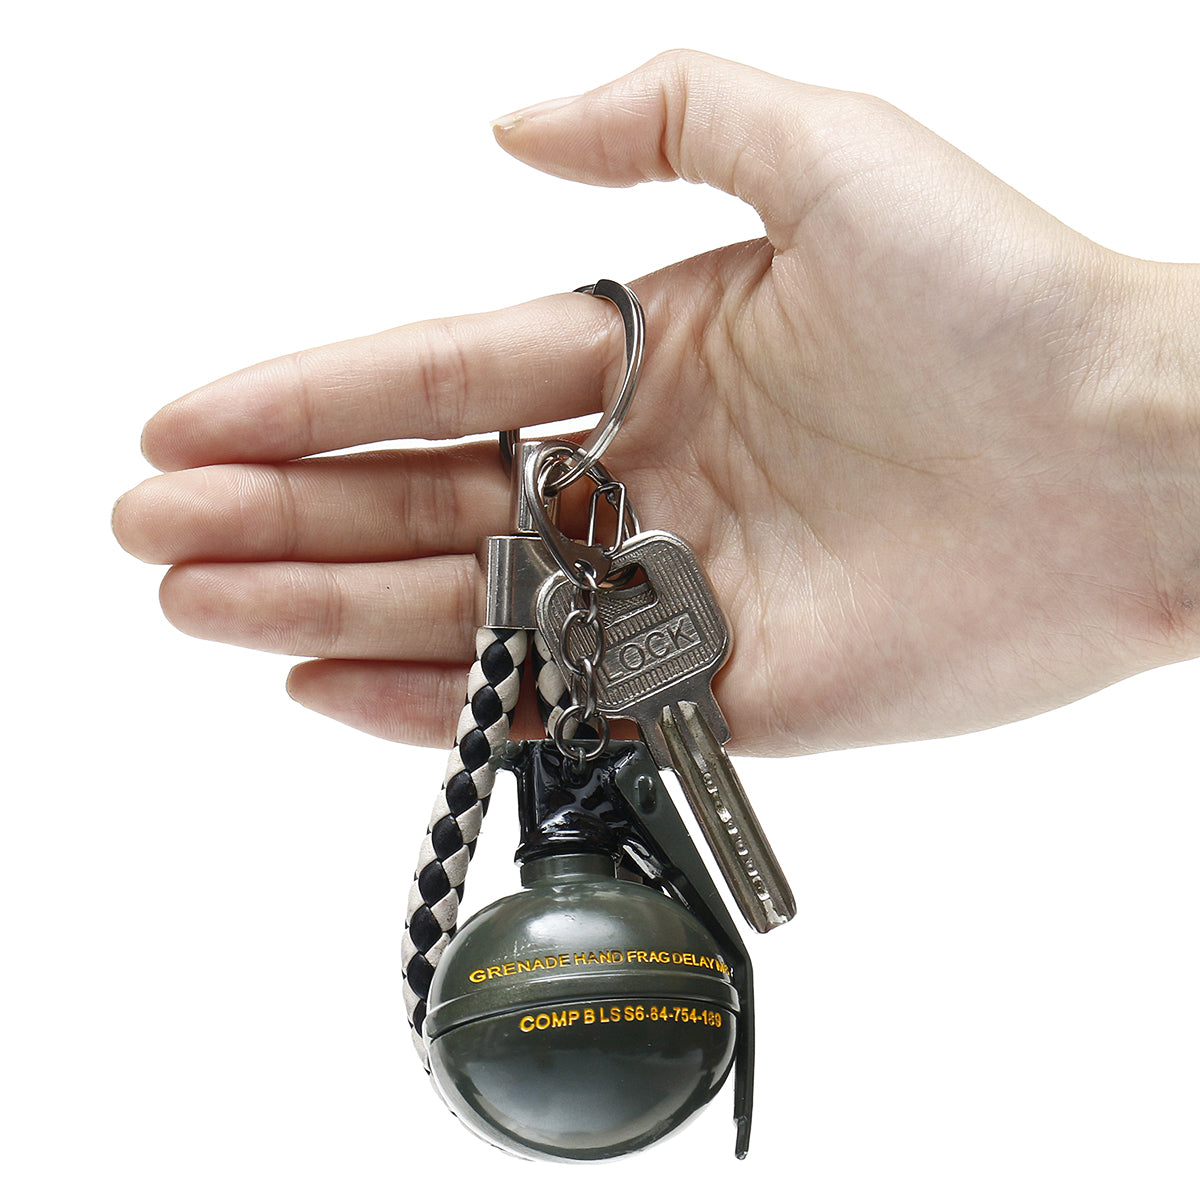 Dim Gray Zinc Alloy Fuel Grenade Weapons Decorative Hanging Key Chains Keychain